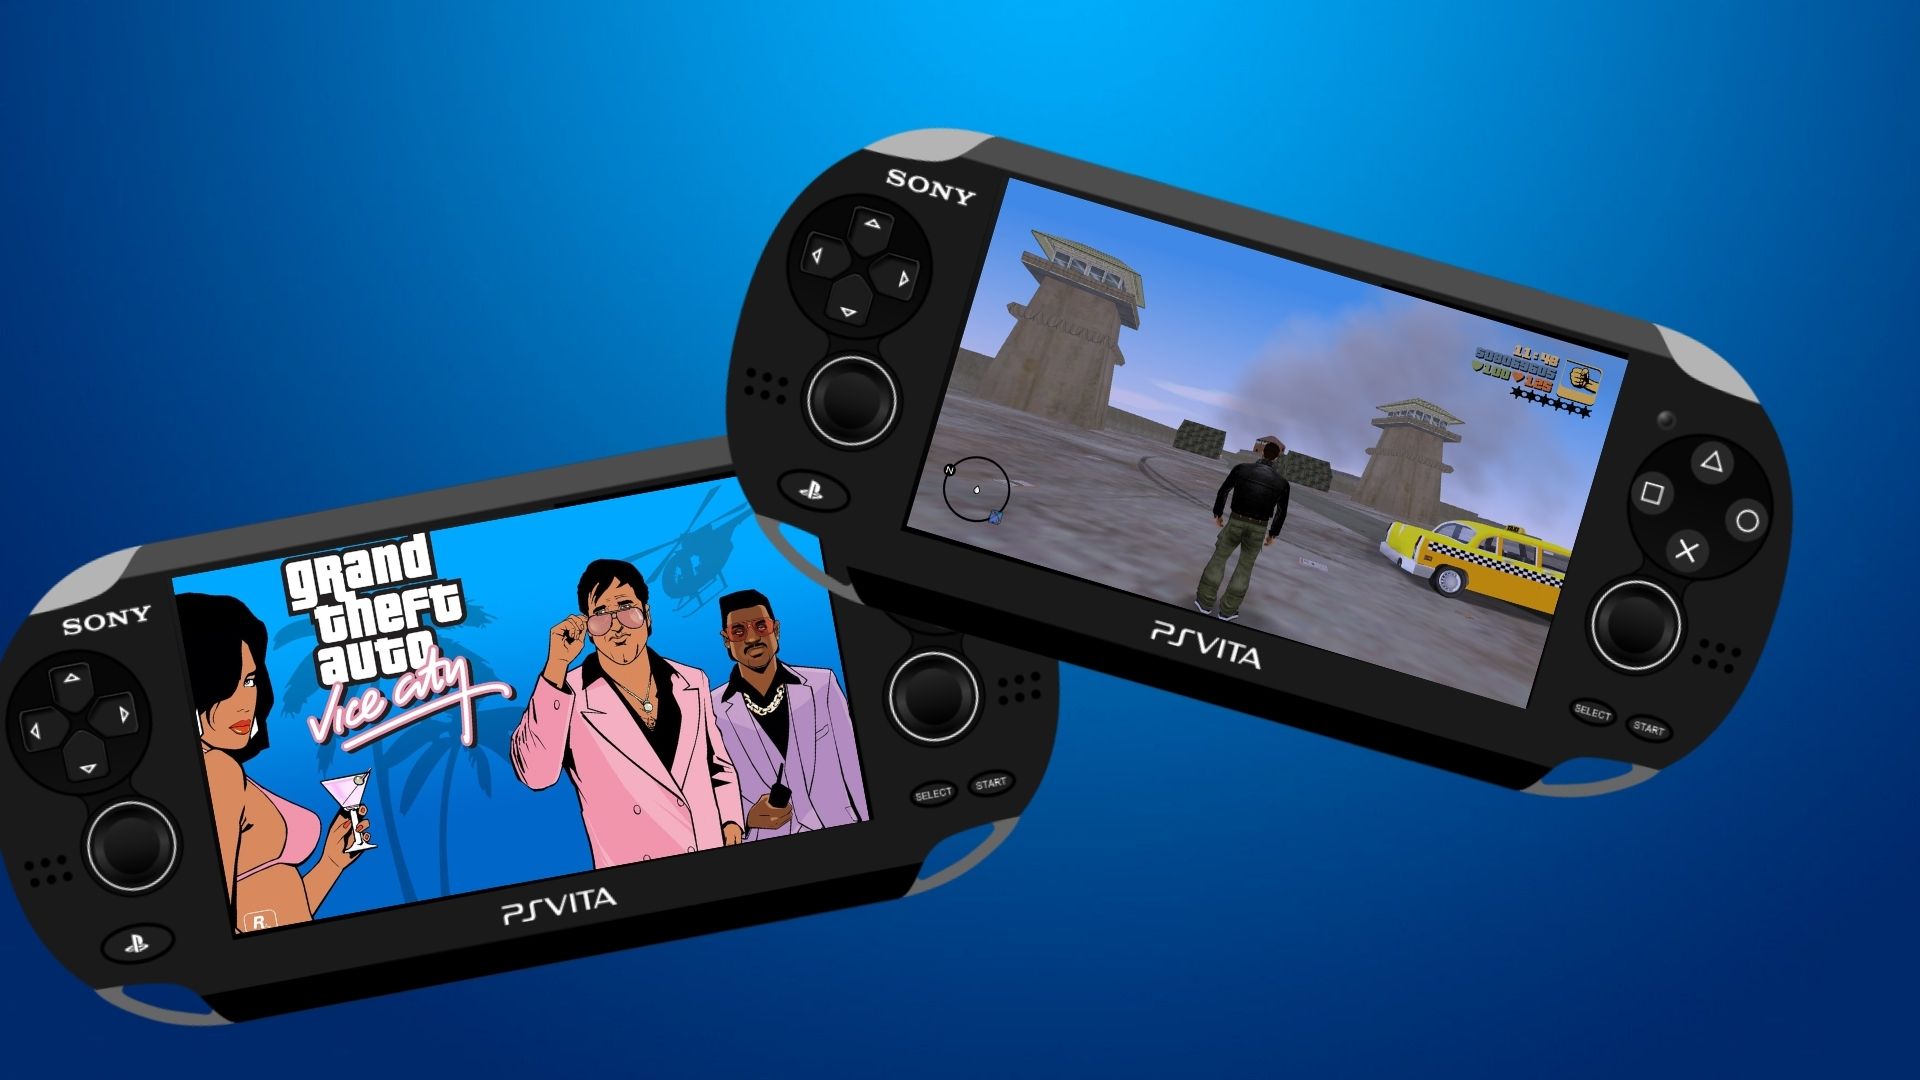 Rumour: Sony Closing PS3, PS Vita, PSP Digital Stores This Summer